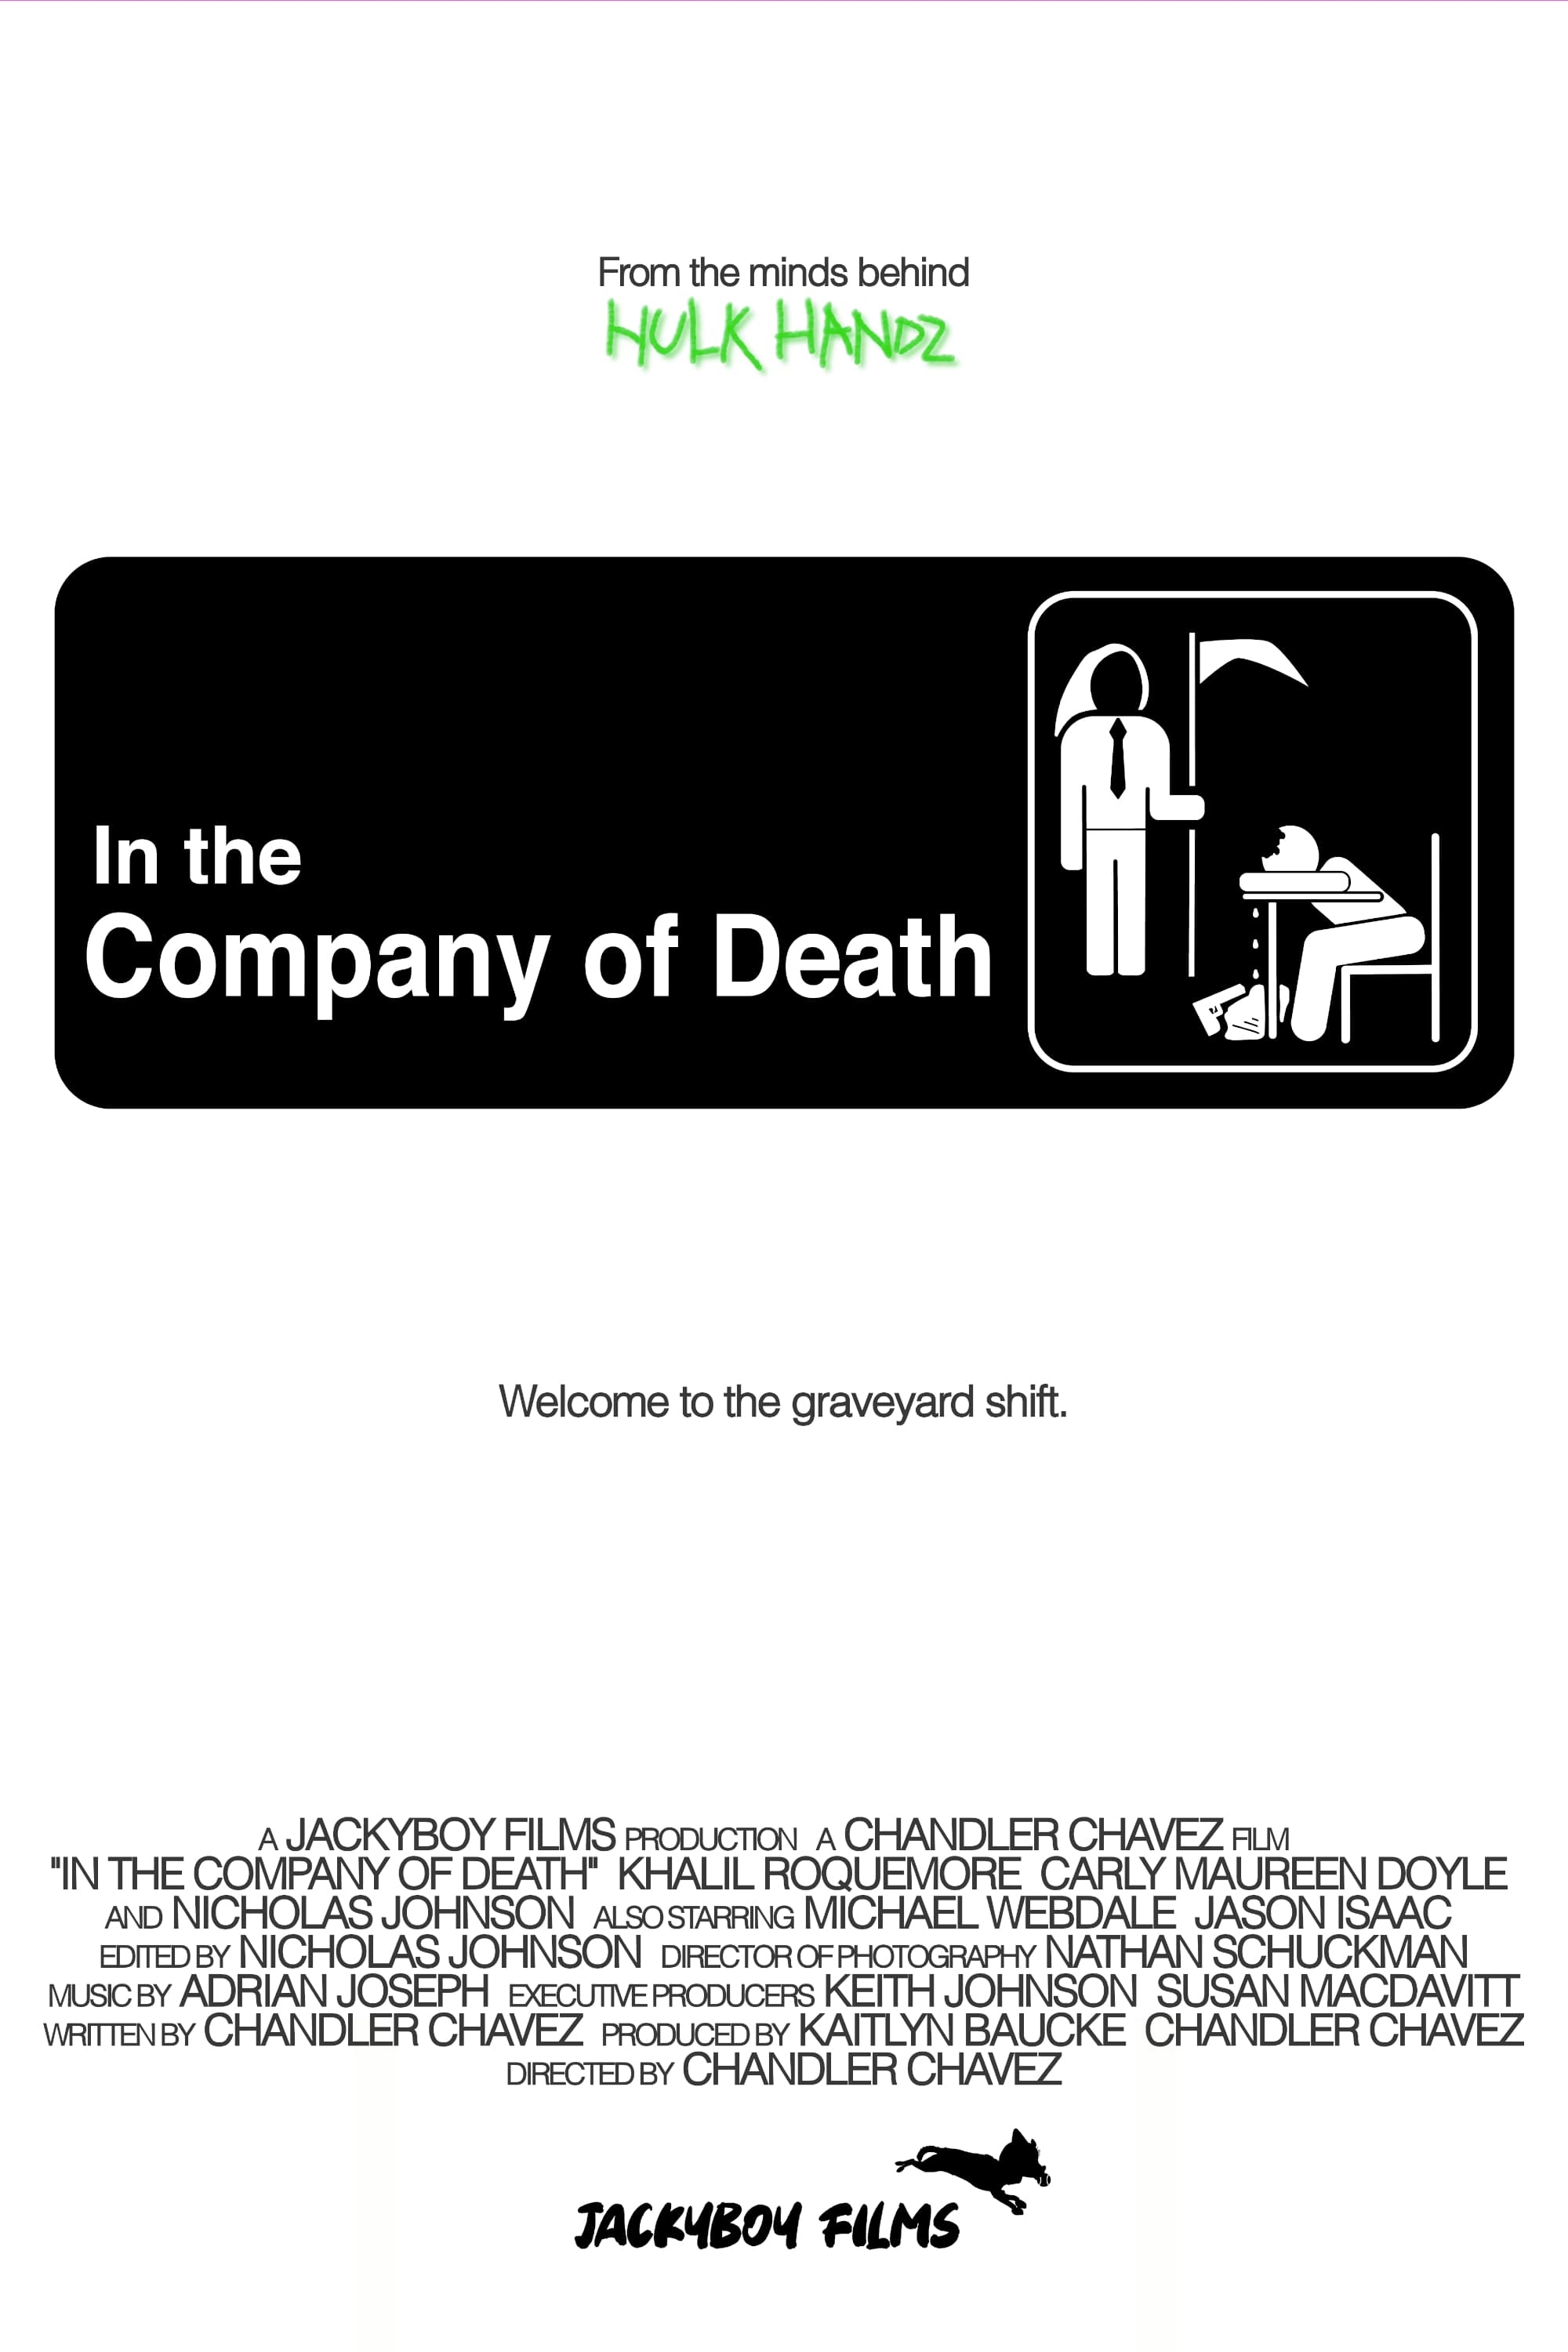 In The Company of Death